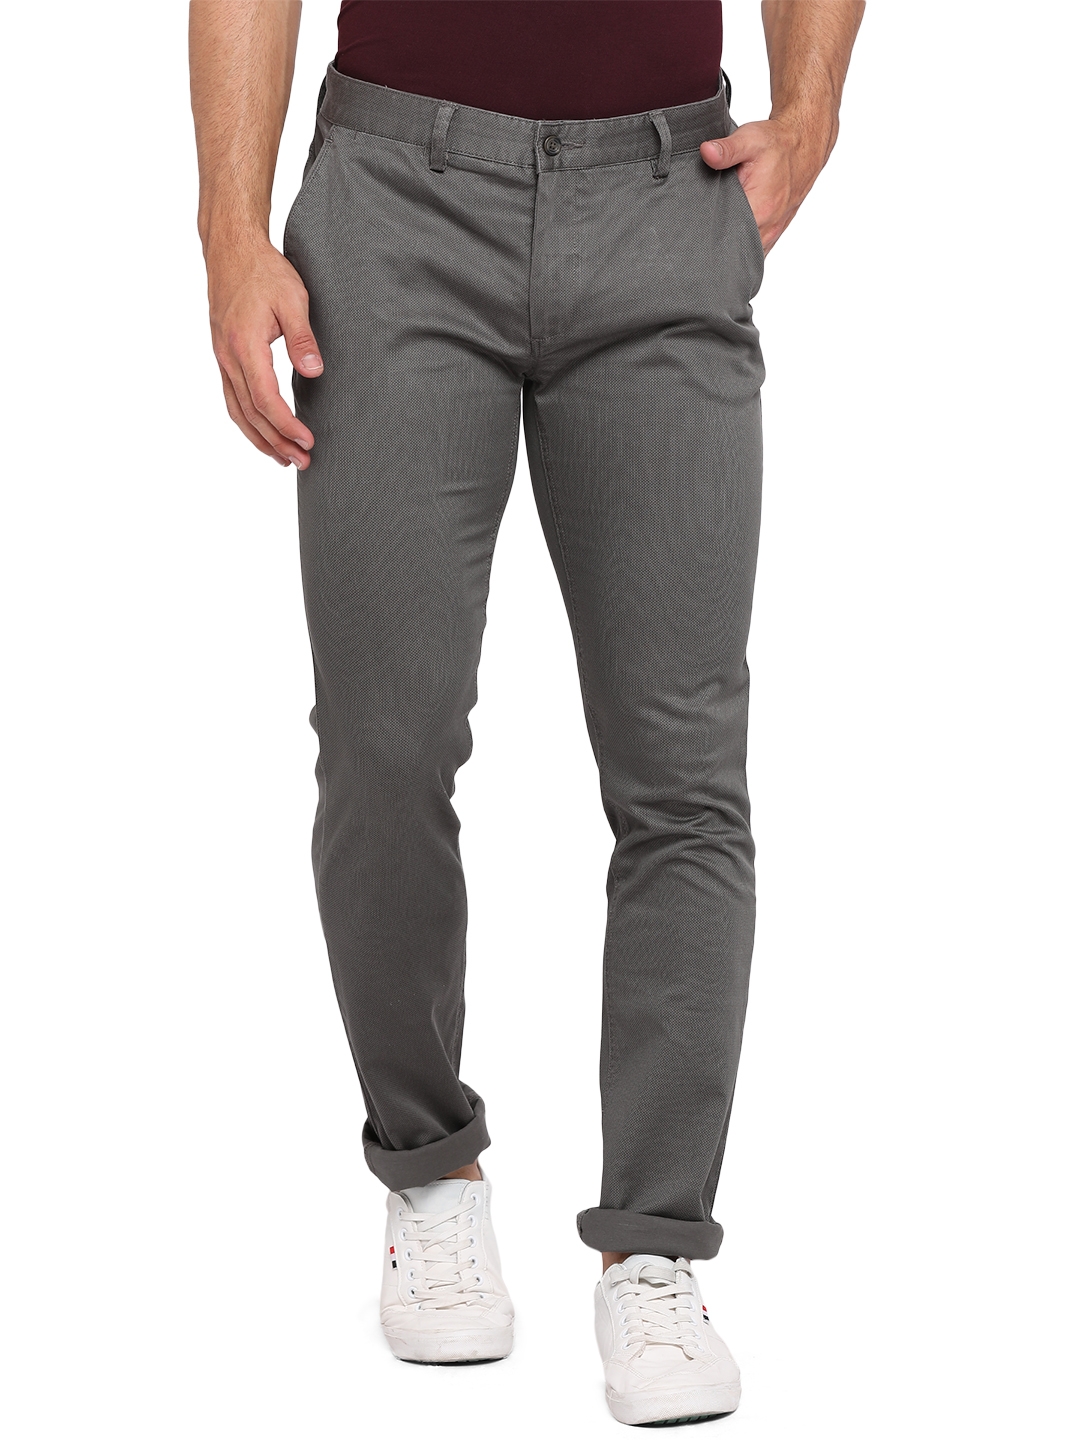 Greenfibre | Grey Solid Slim Fit Casual Trouser | Greenfibre